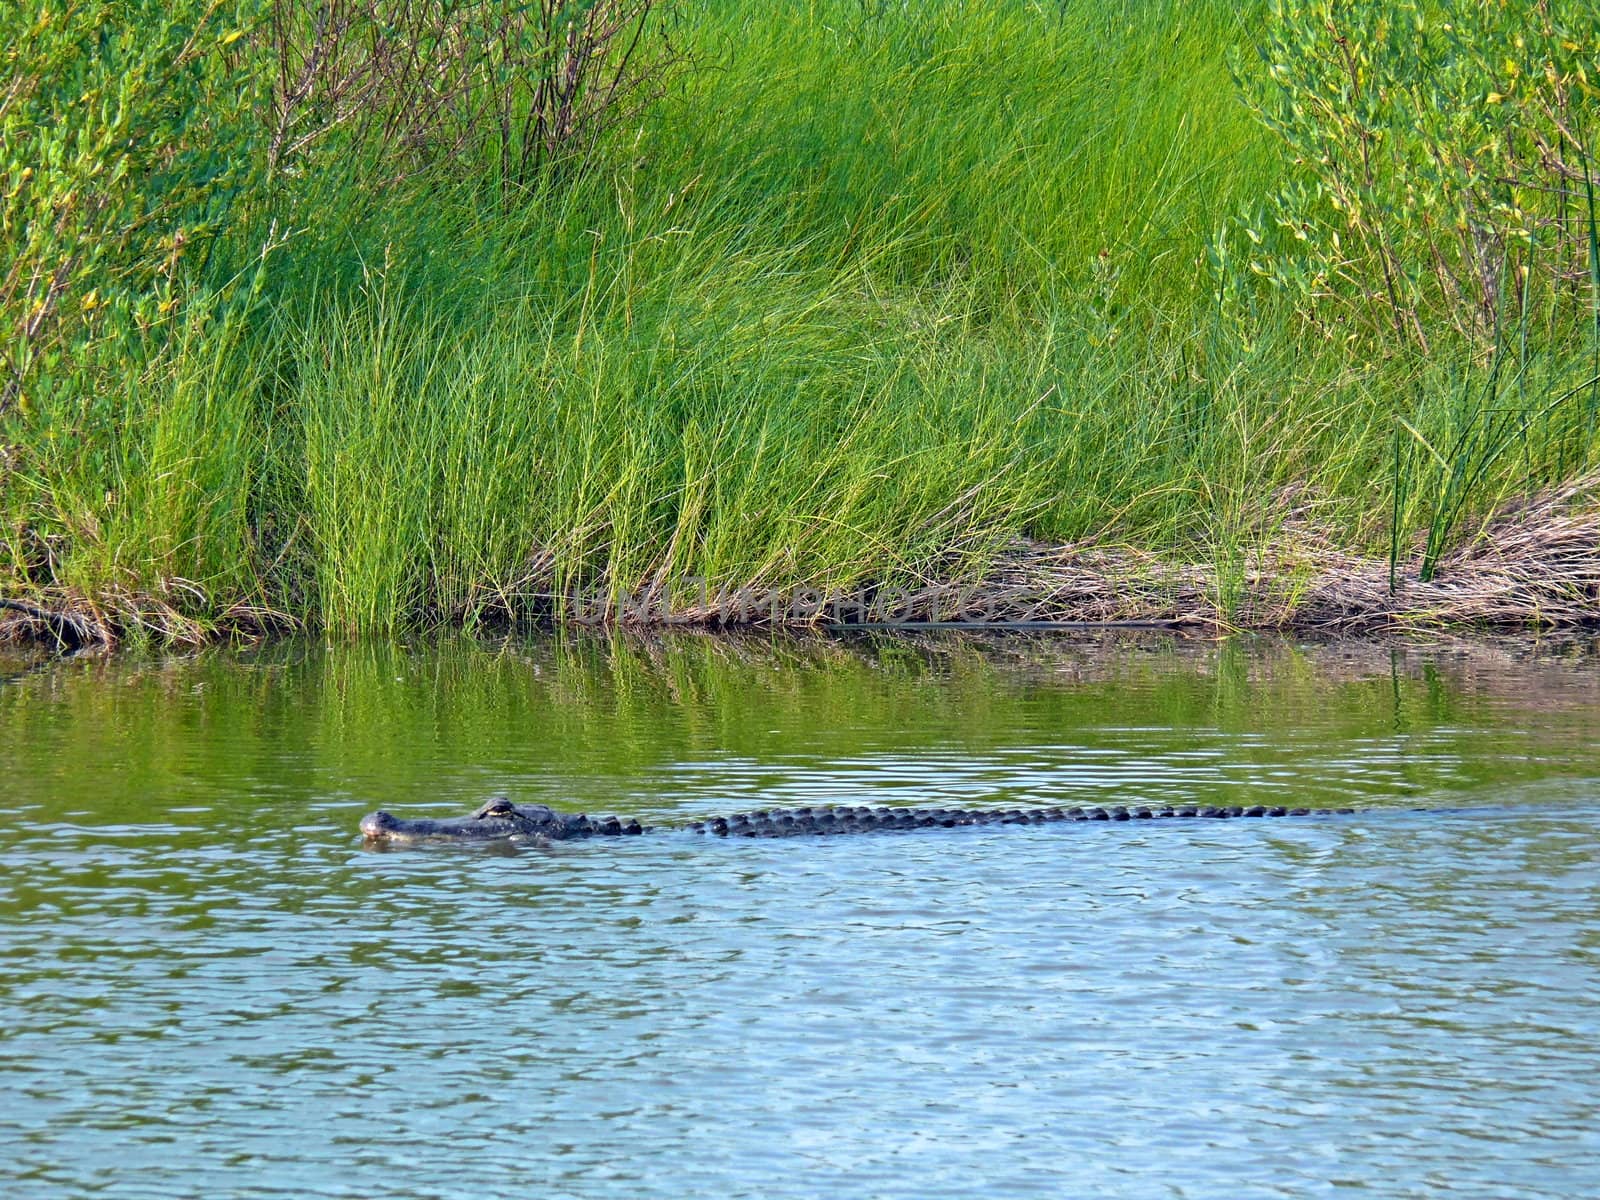 An American Alligator in a bayou  at Anahuac Wildlife reserve , Texas